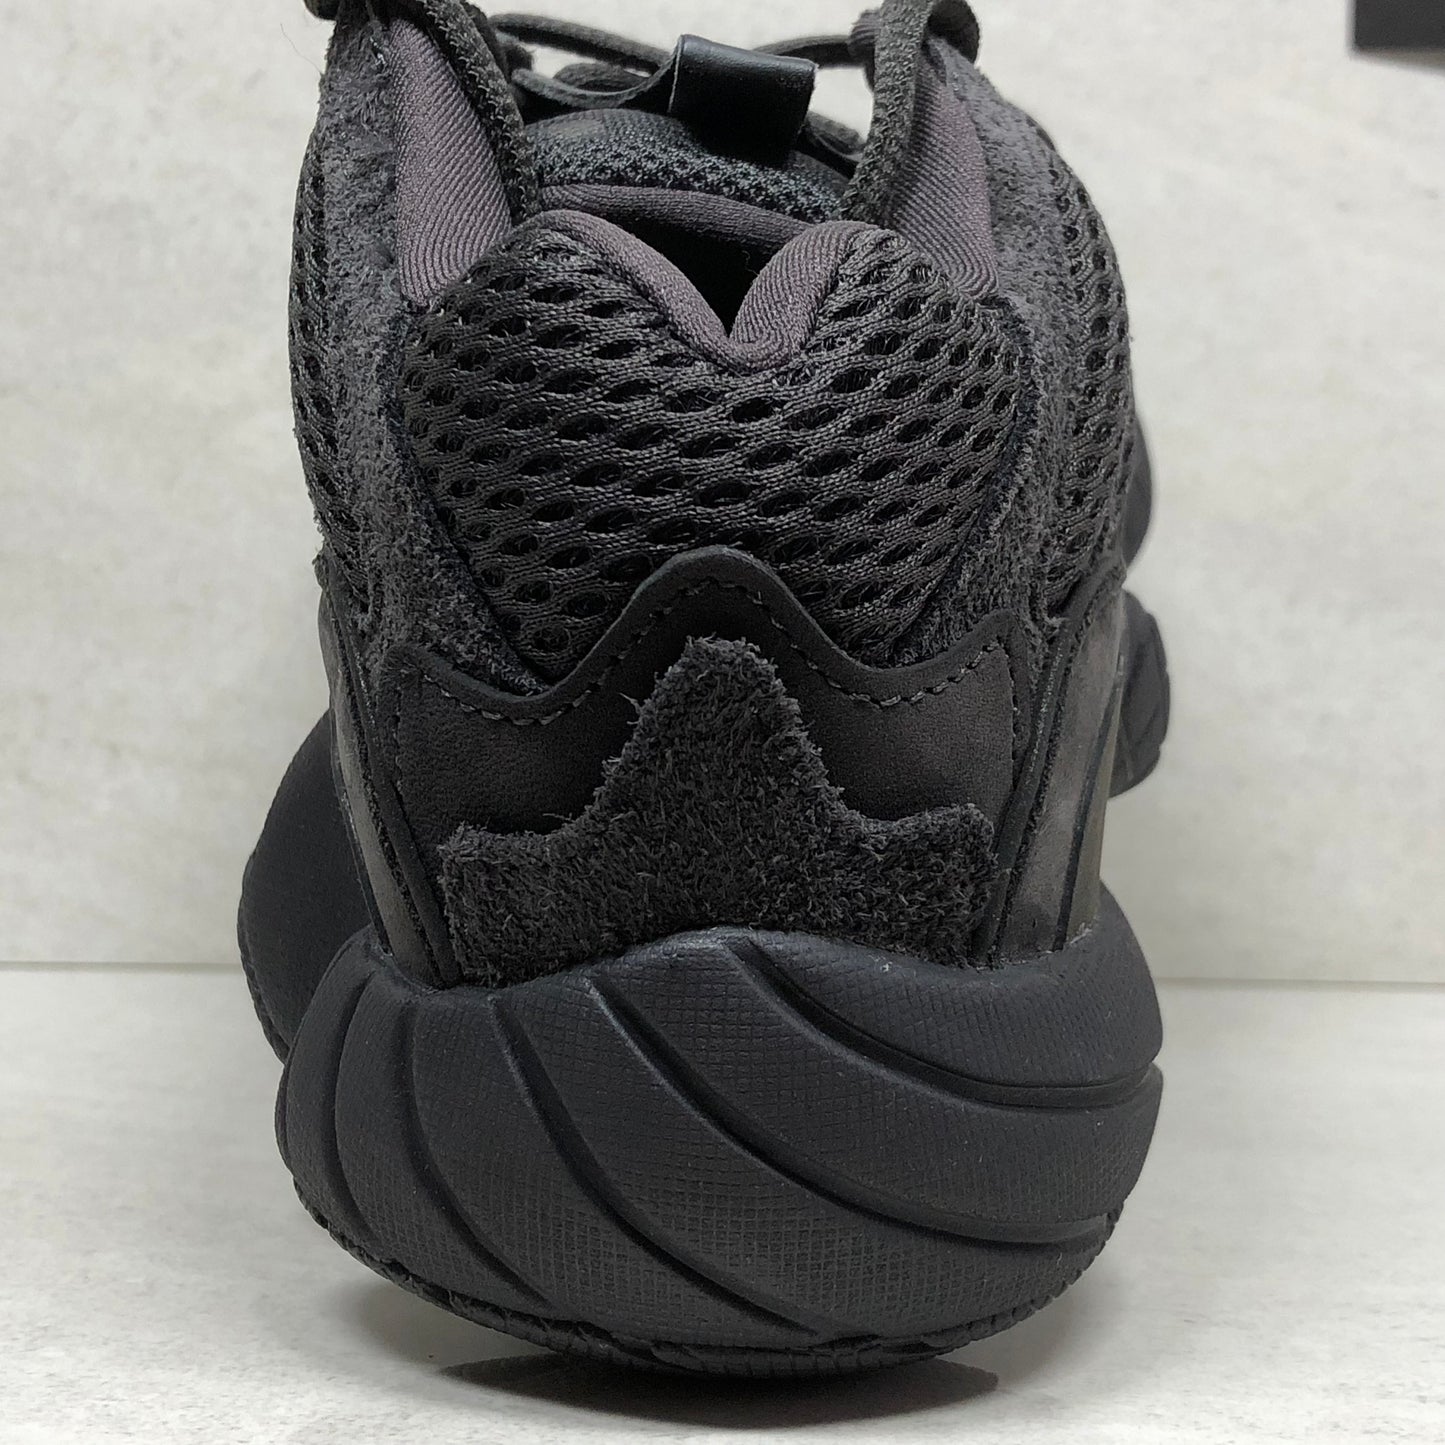 Adidas Yeezy 500 Utility Noir Taille 5/Taille 6.5 F36640